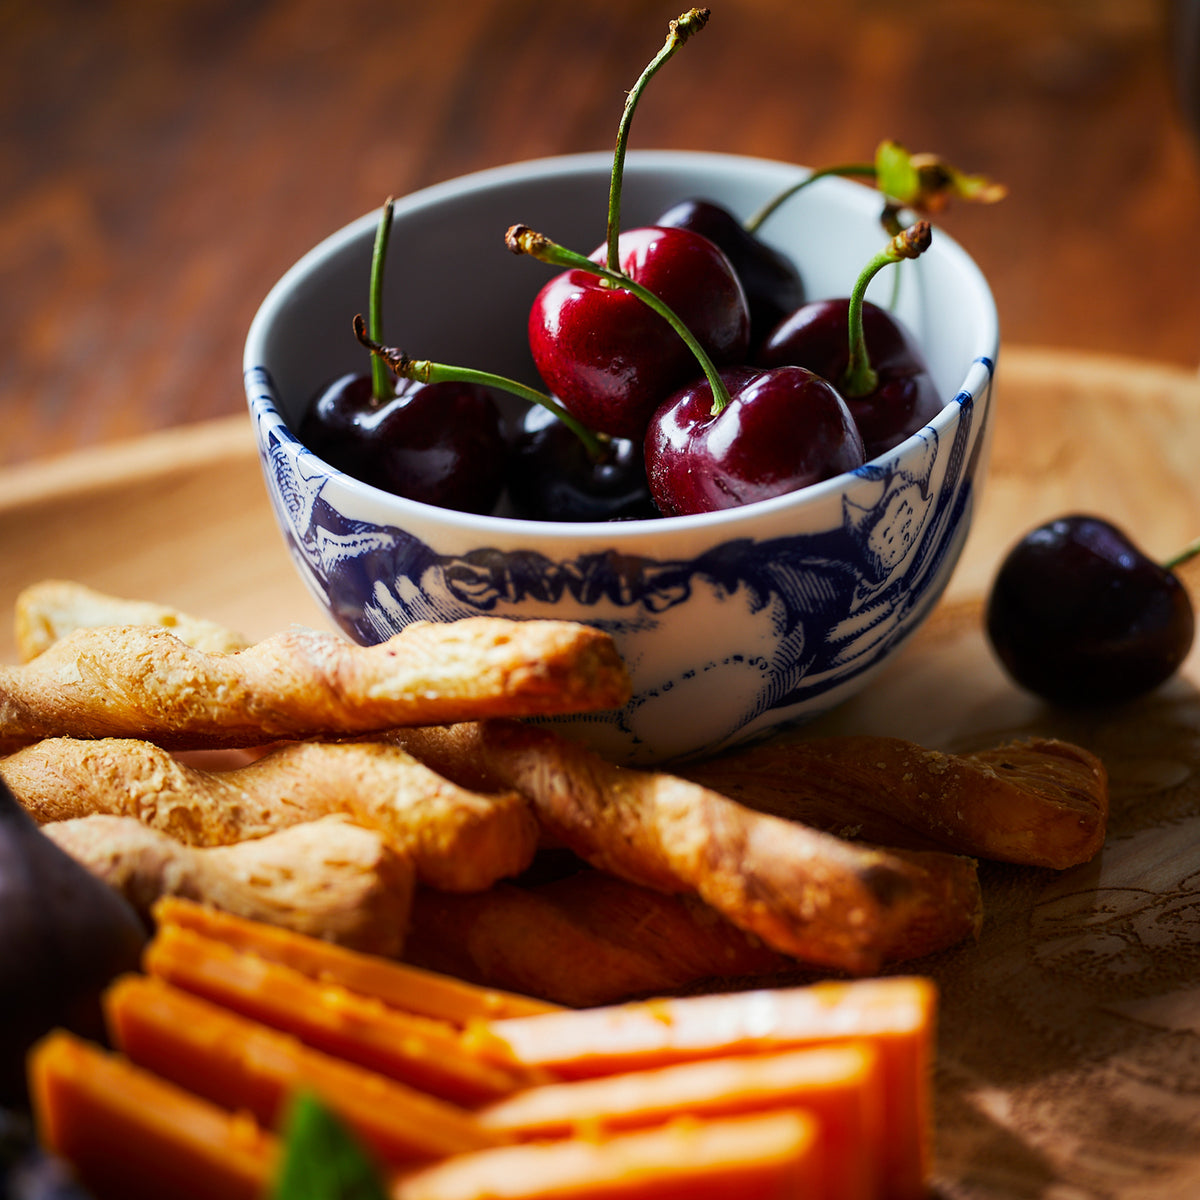 A Crab Snack Bowl of cherries and carrot sticks on a table by Caskata Artisanal Home.